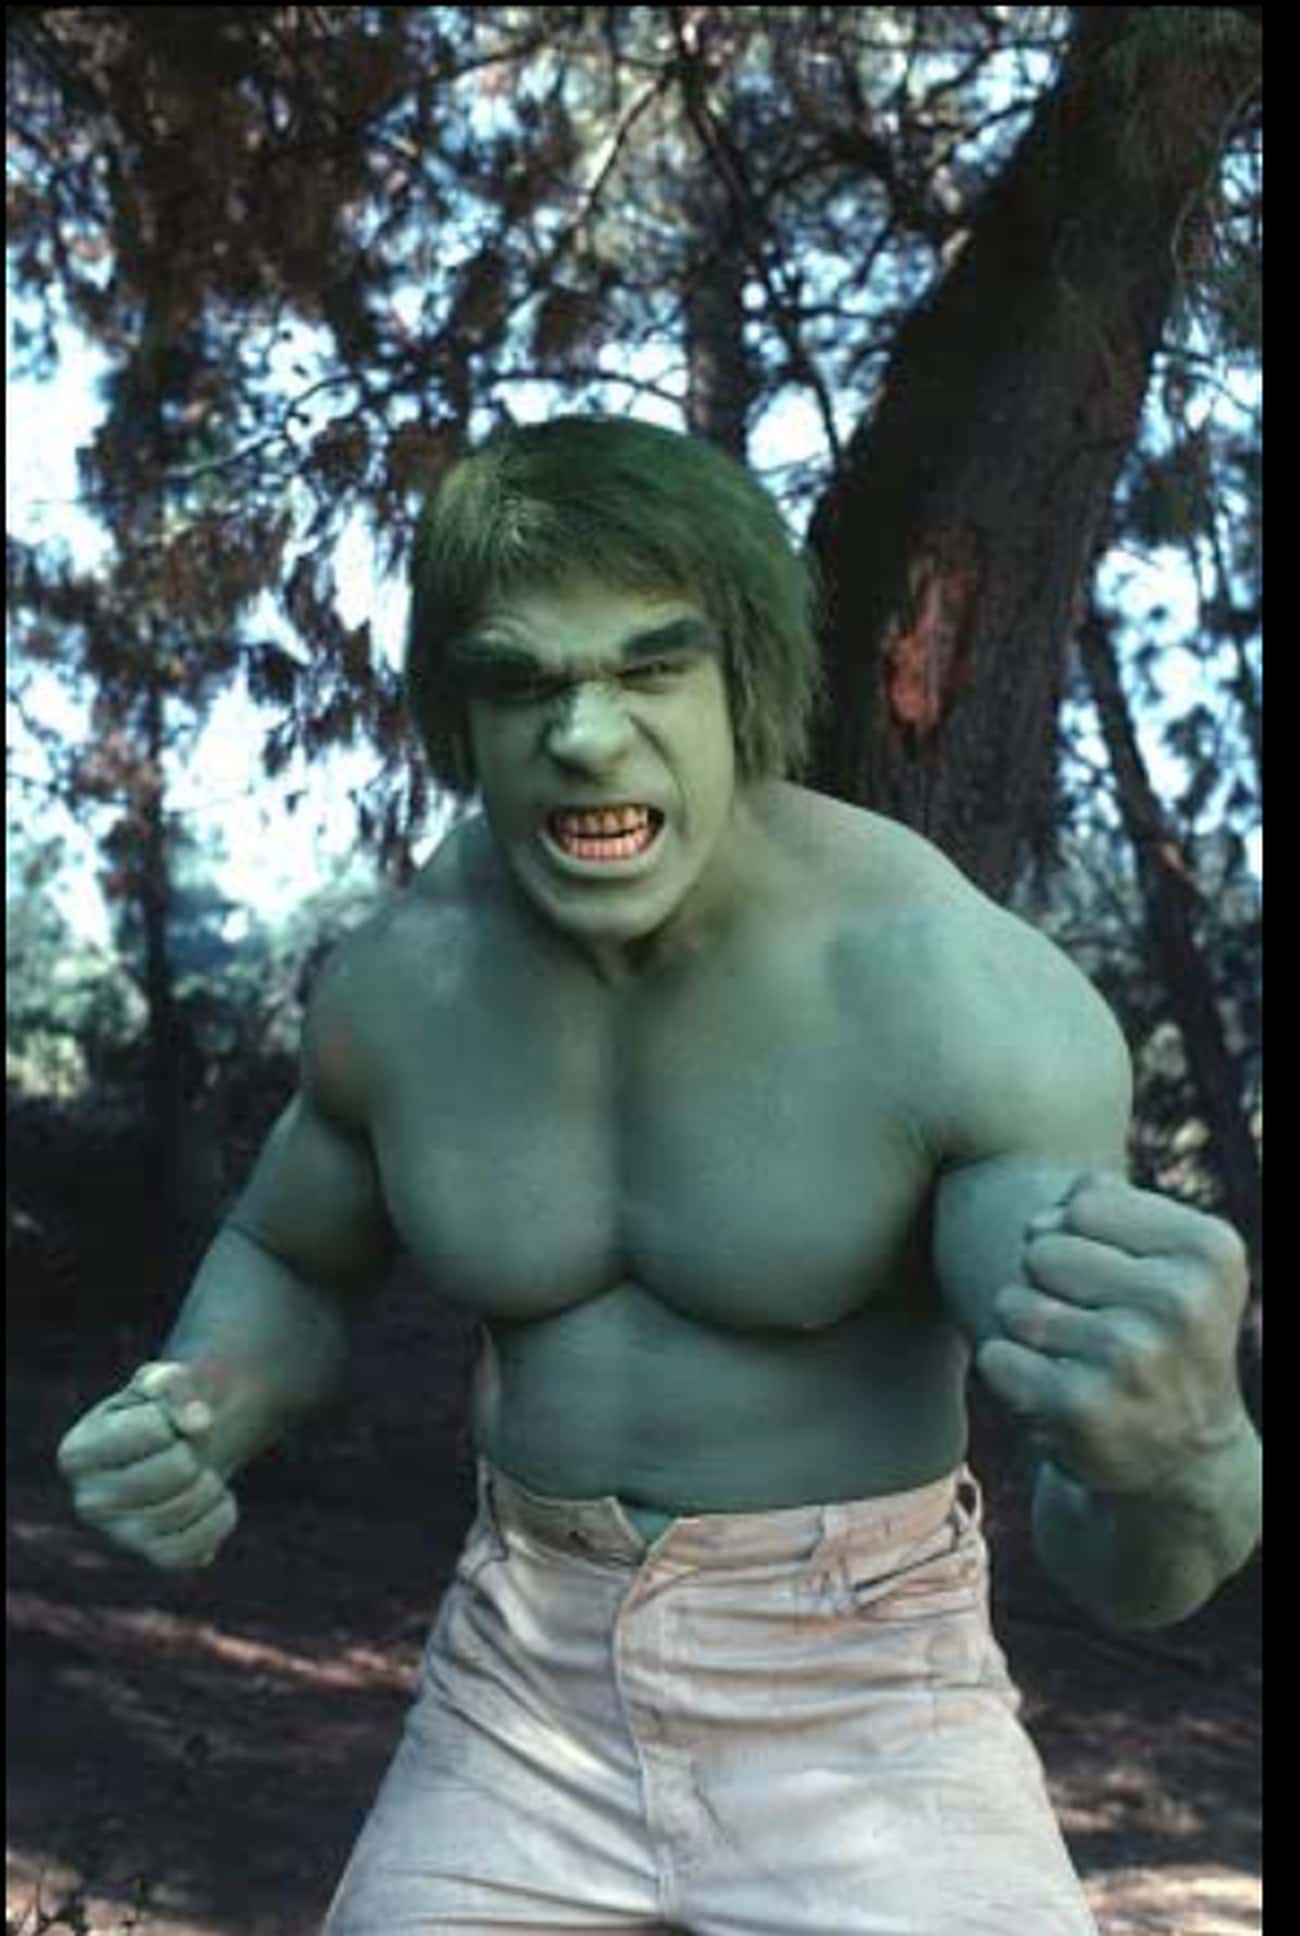 Lou Ferrigno Once Drove Home In His 'Incredible Hulk' Makeup - With Disastrous Results